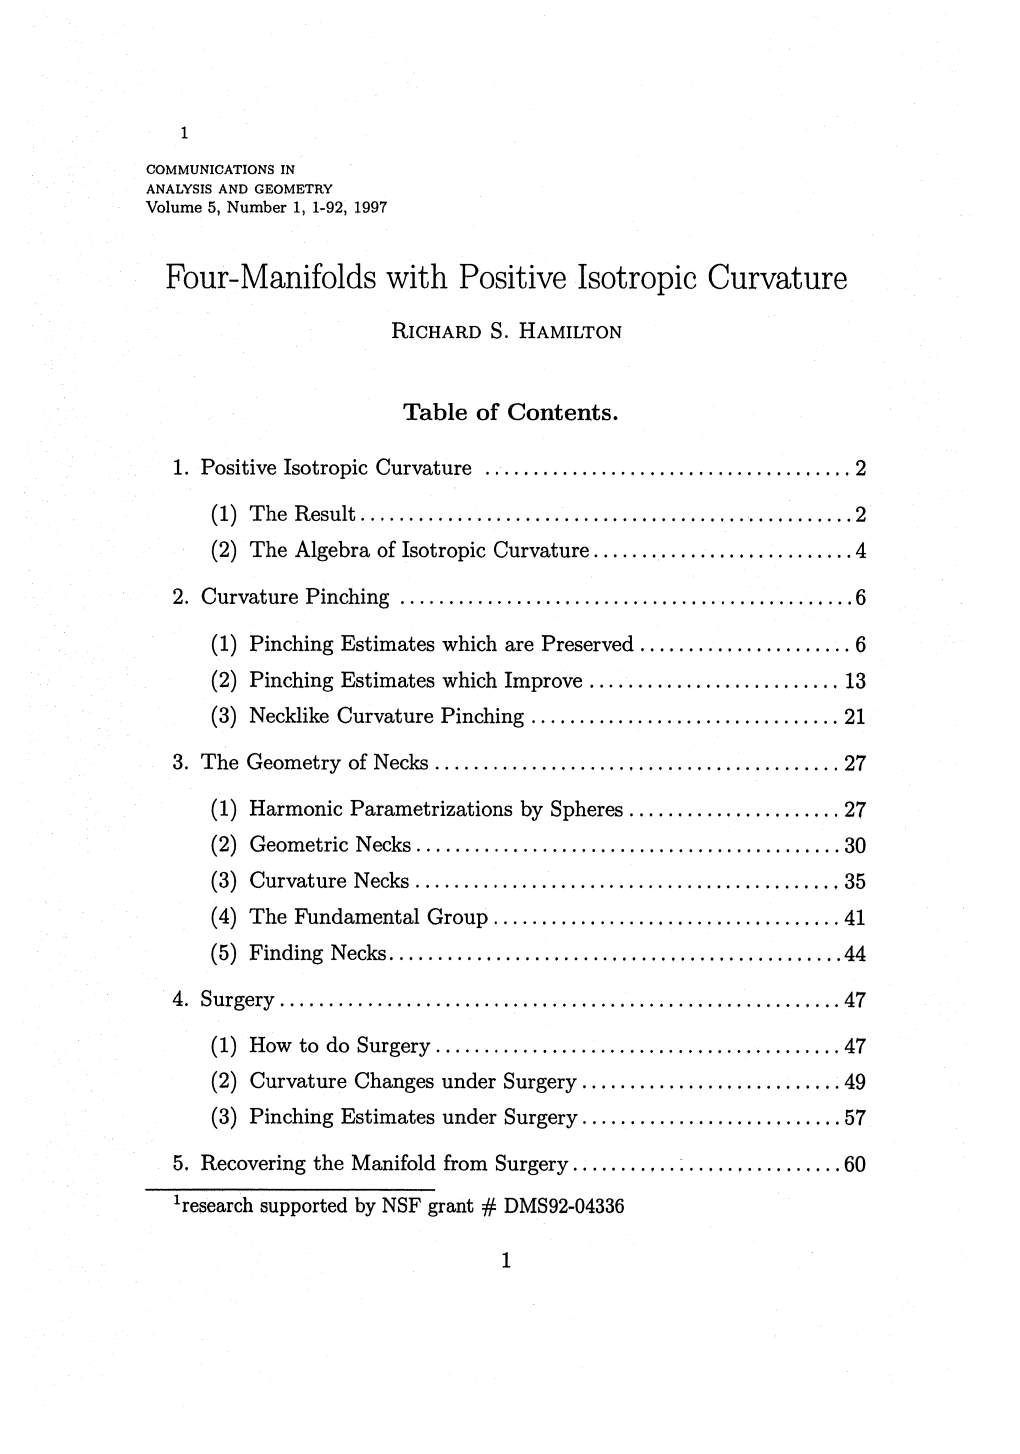 Four-Manifolds with Positive Isotropic Curvature